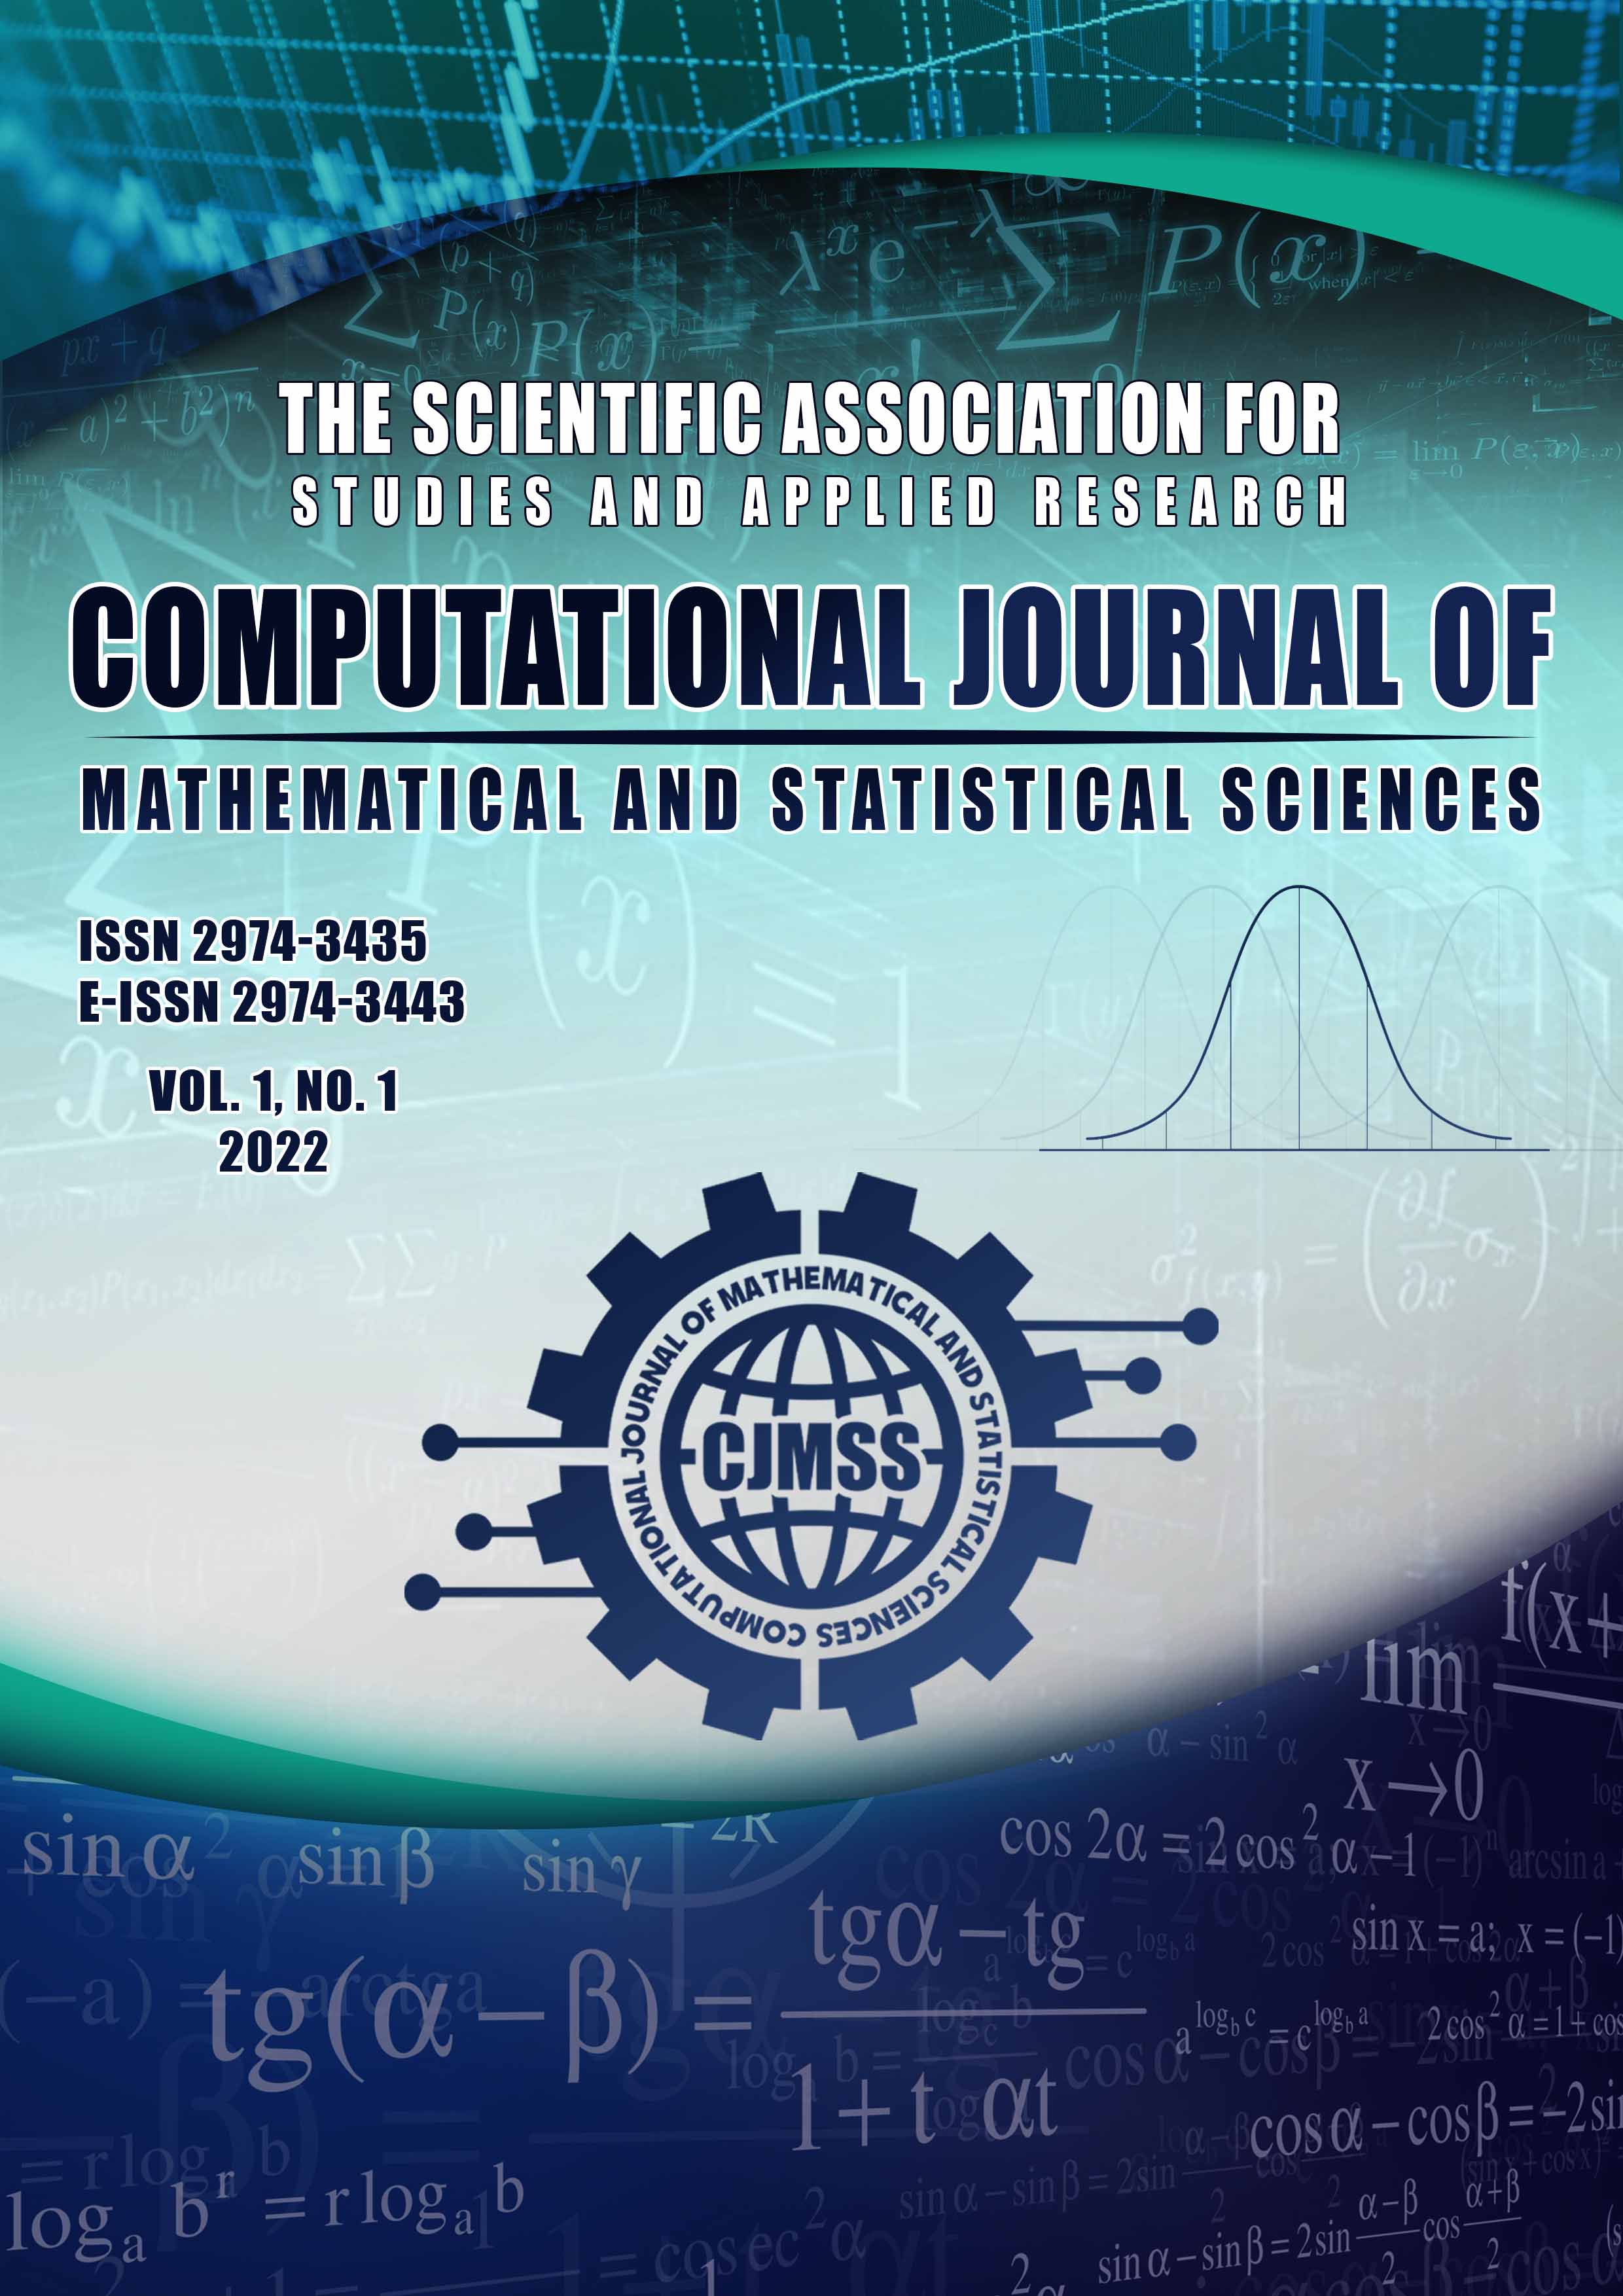 Computational Journal of Mathematical and Statistical Sciences